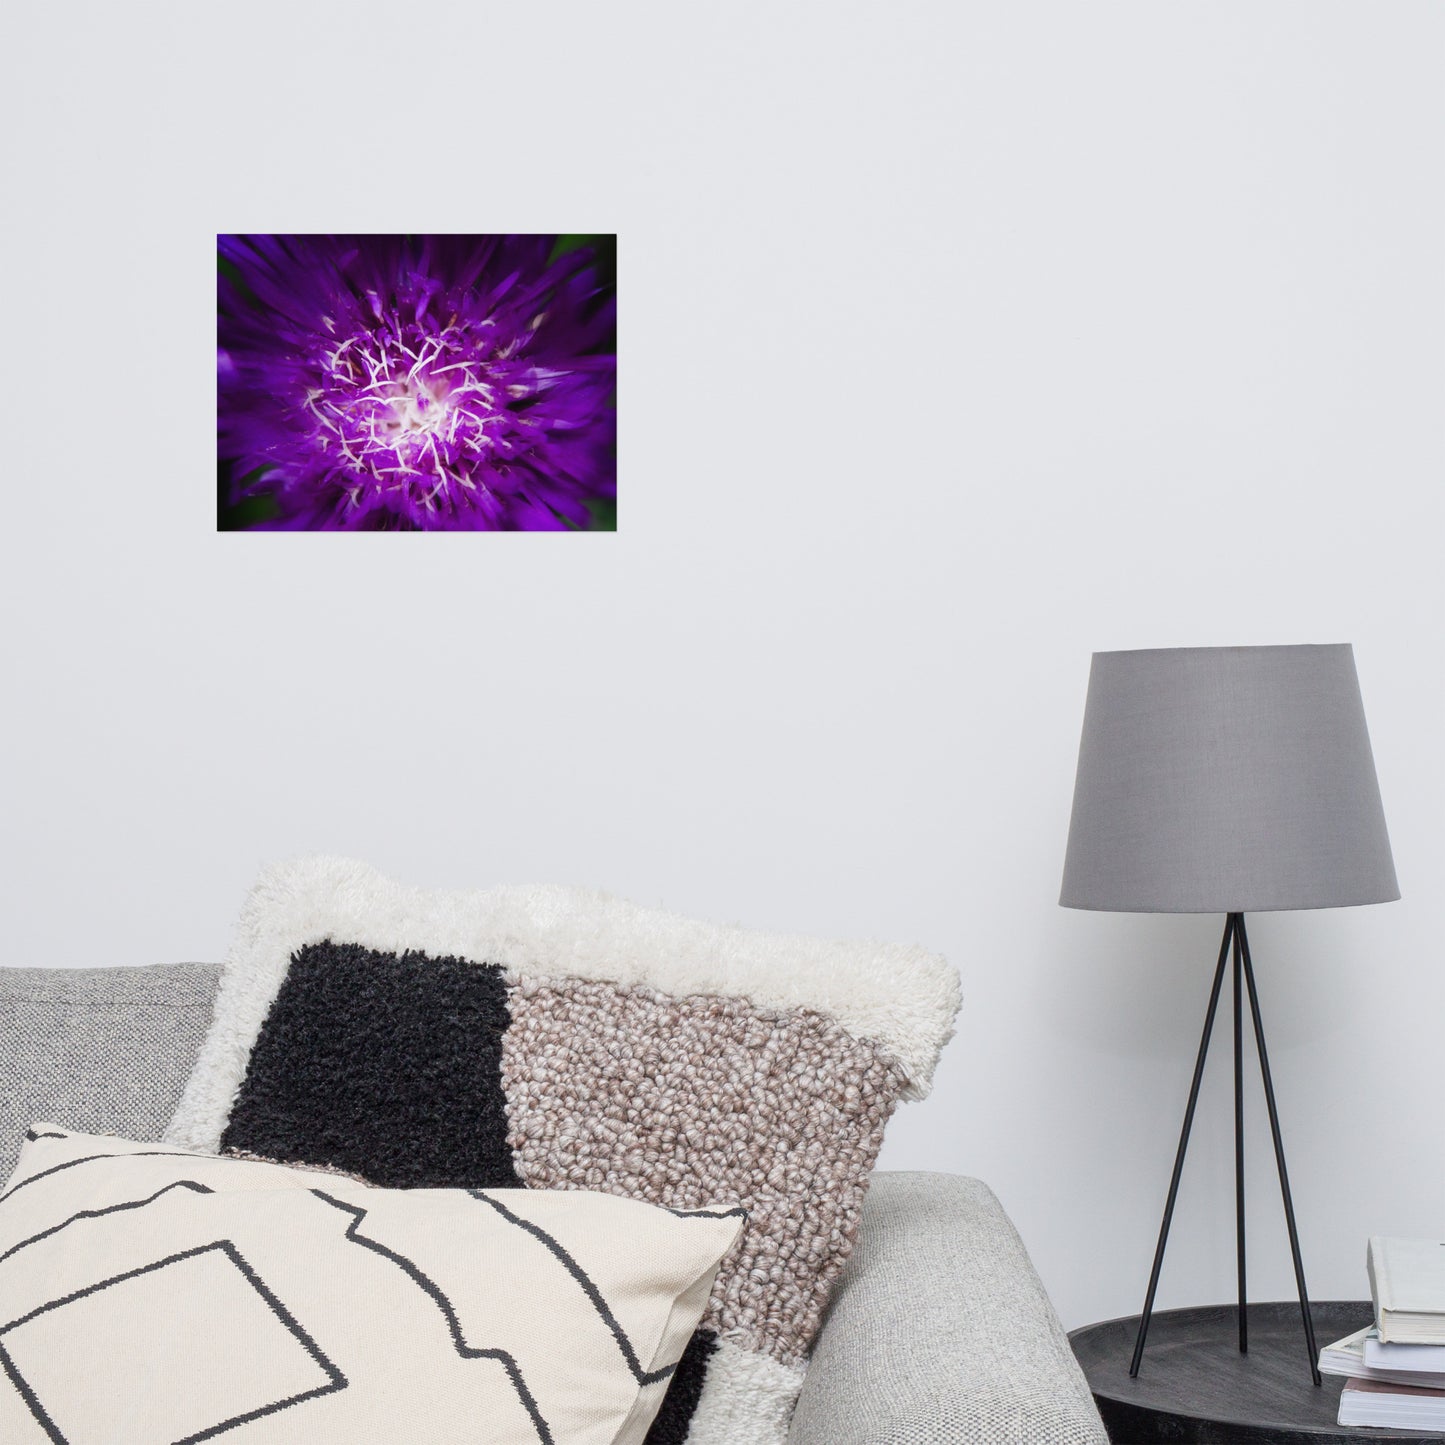 Nature Wall Art For Living Room: Dark Purple and White Aster Bloom Close-up - Botanical / Floral / Flora / Flowers / Nature Photograph Loose / Unframed / Frameless / Frameable Wall Art Print - Artwork